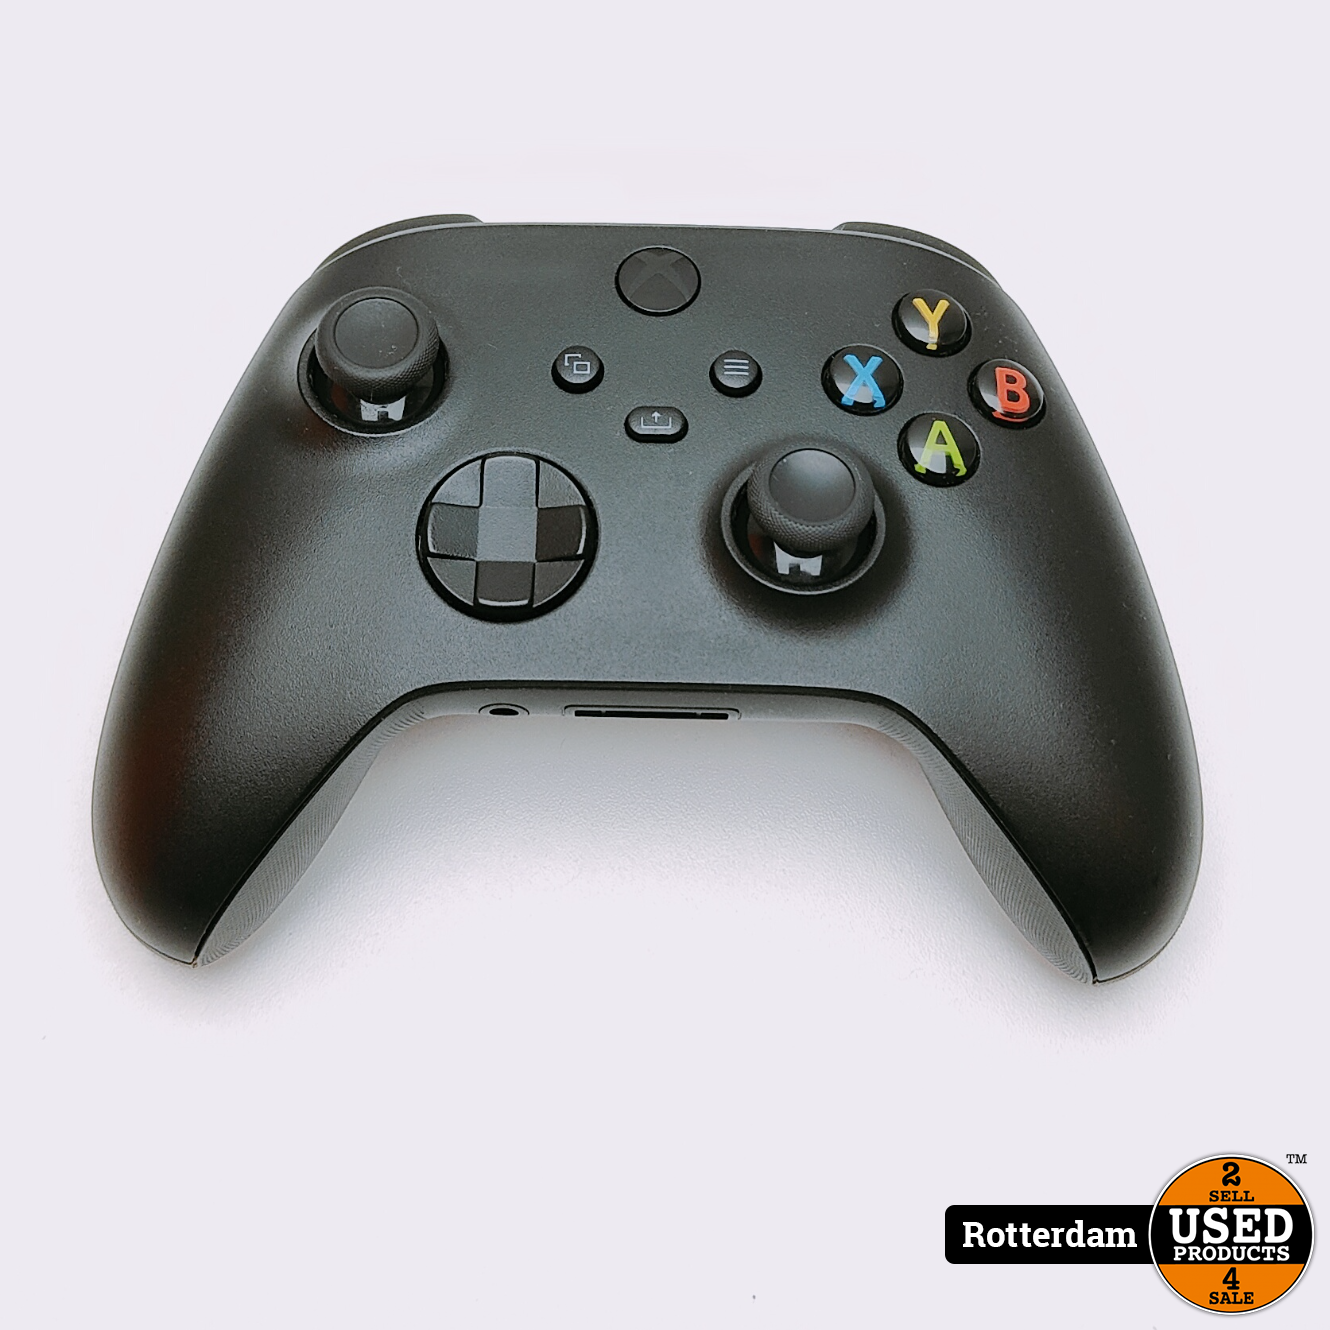 Advertentie Fervent neef Xbox Draadloze Controller - Carbon Zwart - Series X / S - Xbox One - Used  Products Rotterdam